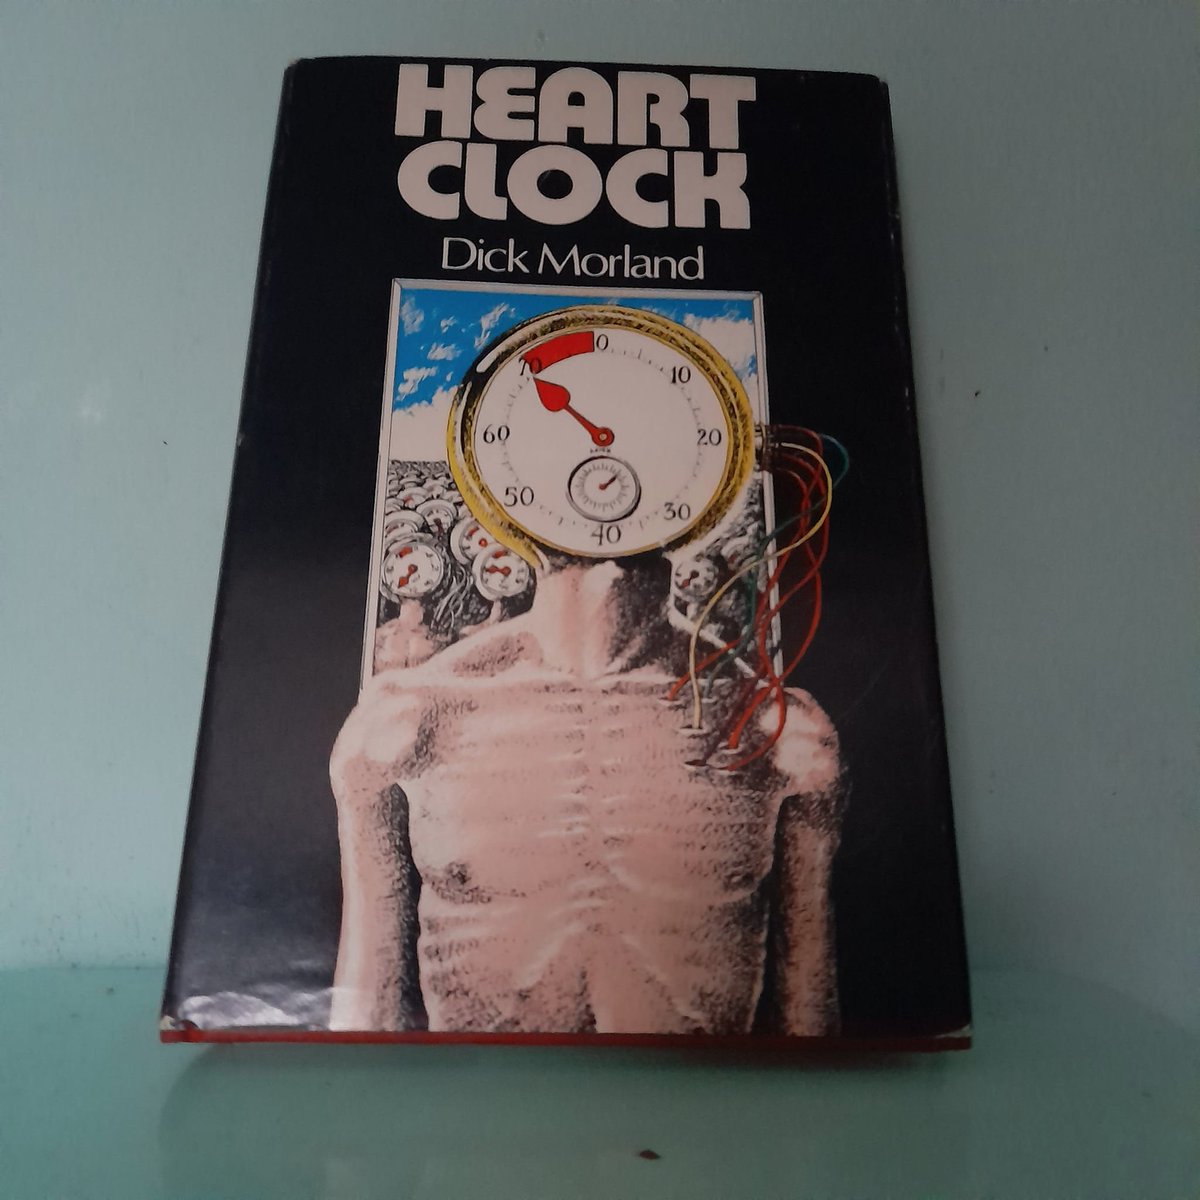 HEART CLOCK by Dick Morland Faber & Faber, first edition 1973 Jacket illustration by Dennis Leigh @foxxmetamedia I love this of course, but how did he get the commission, and the right to get it acknowledged on the inside fold? Amazing